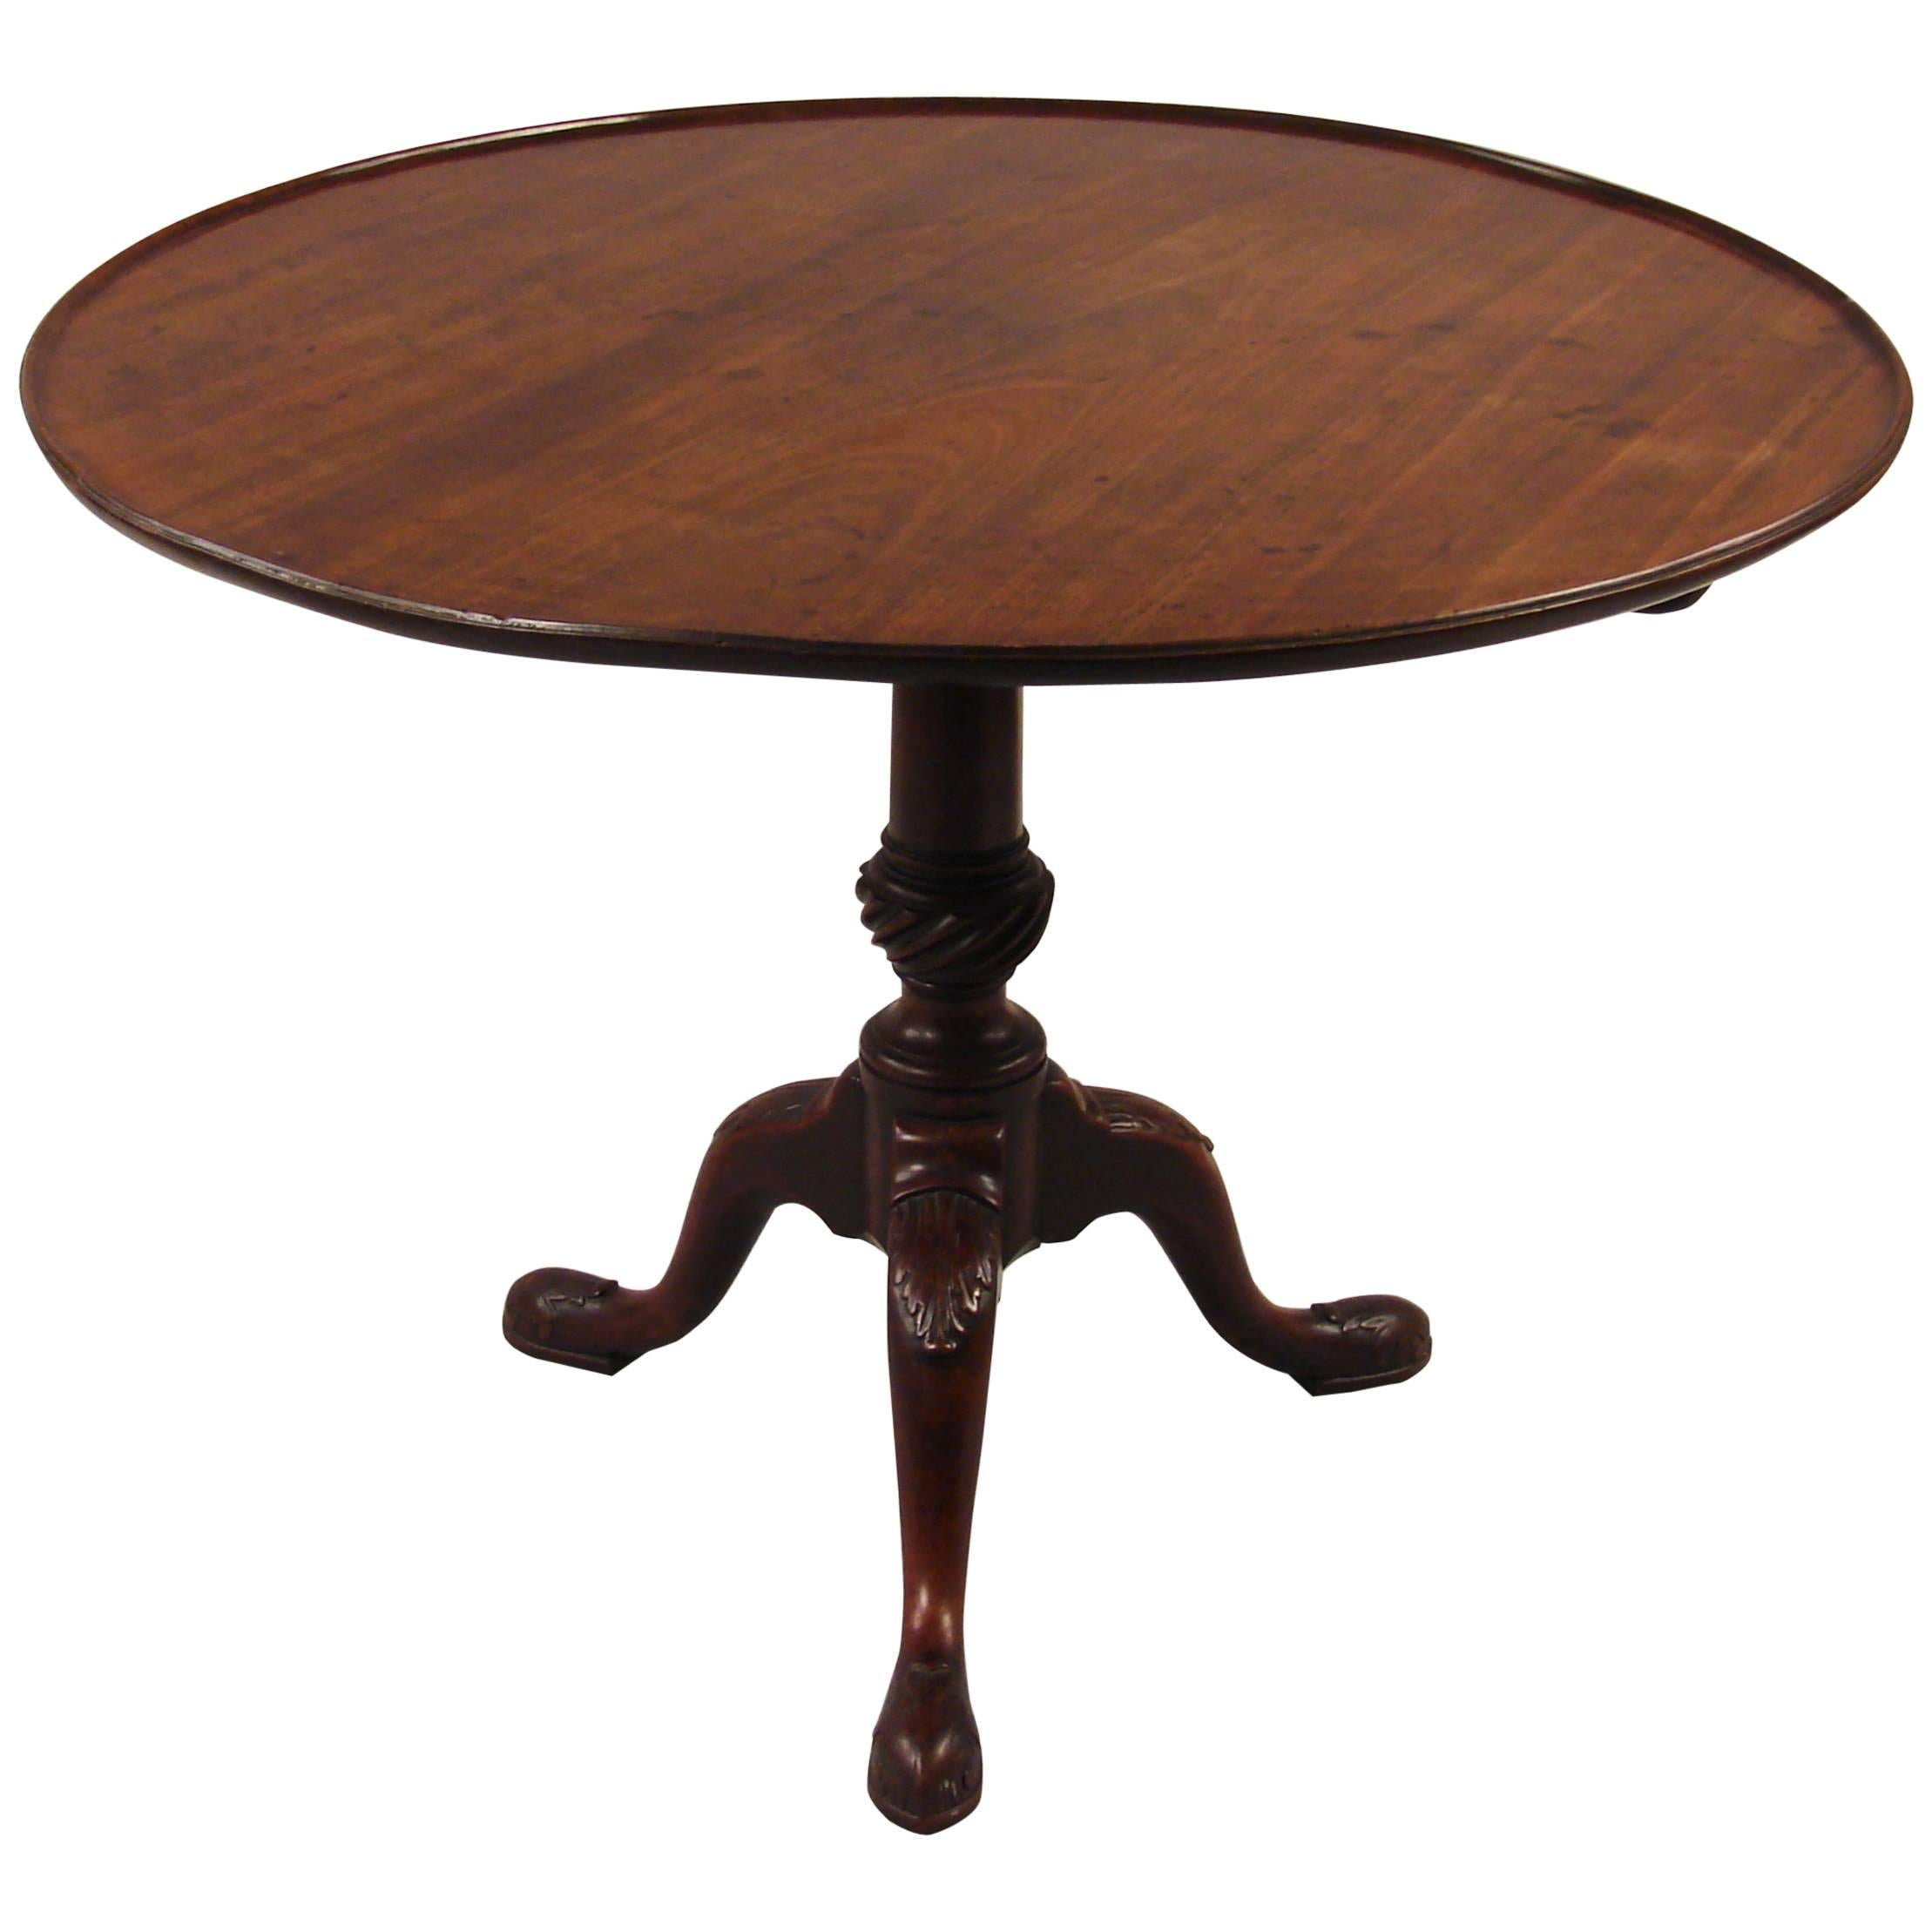 George II Mahogany Dish-Top Table of Large Scale